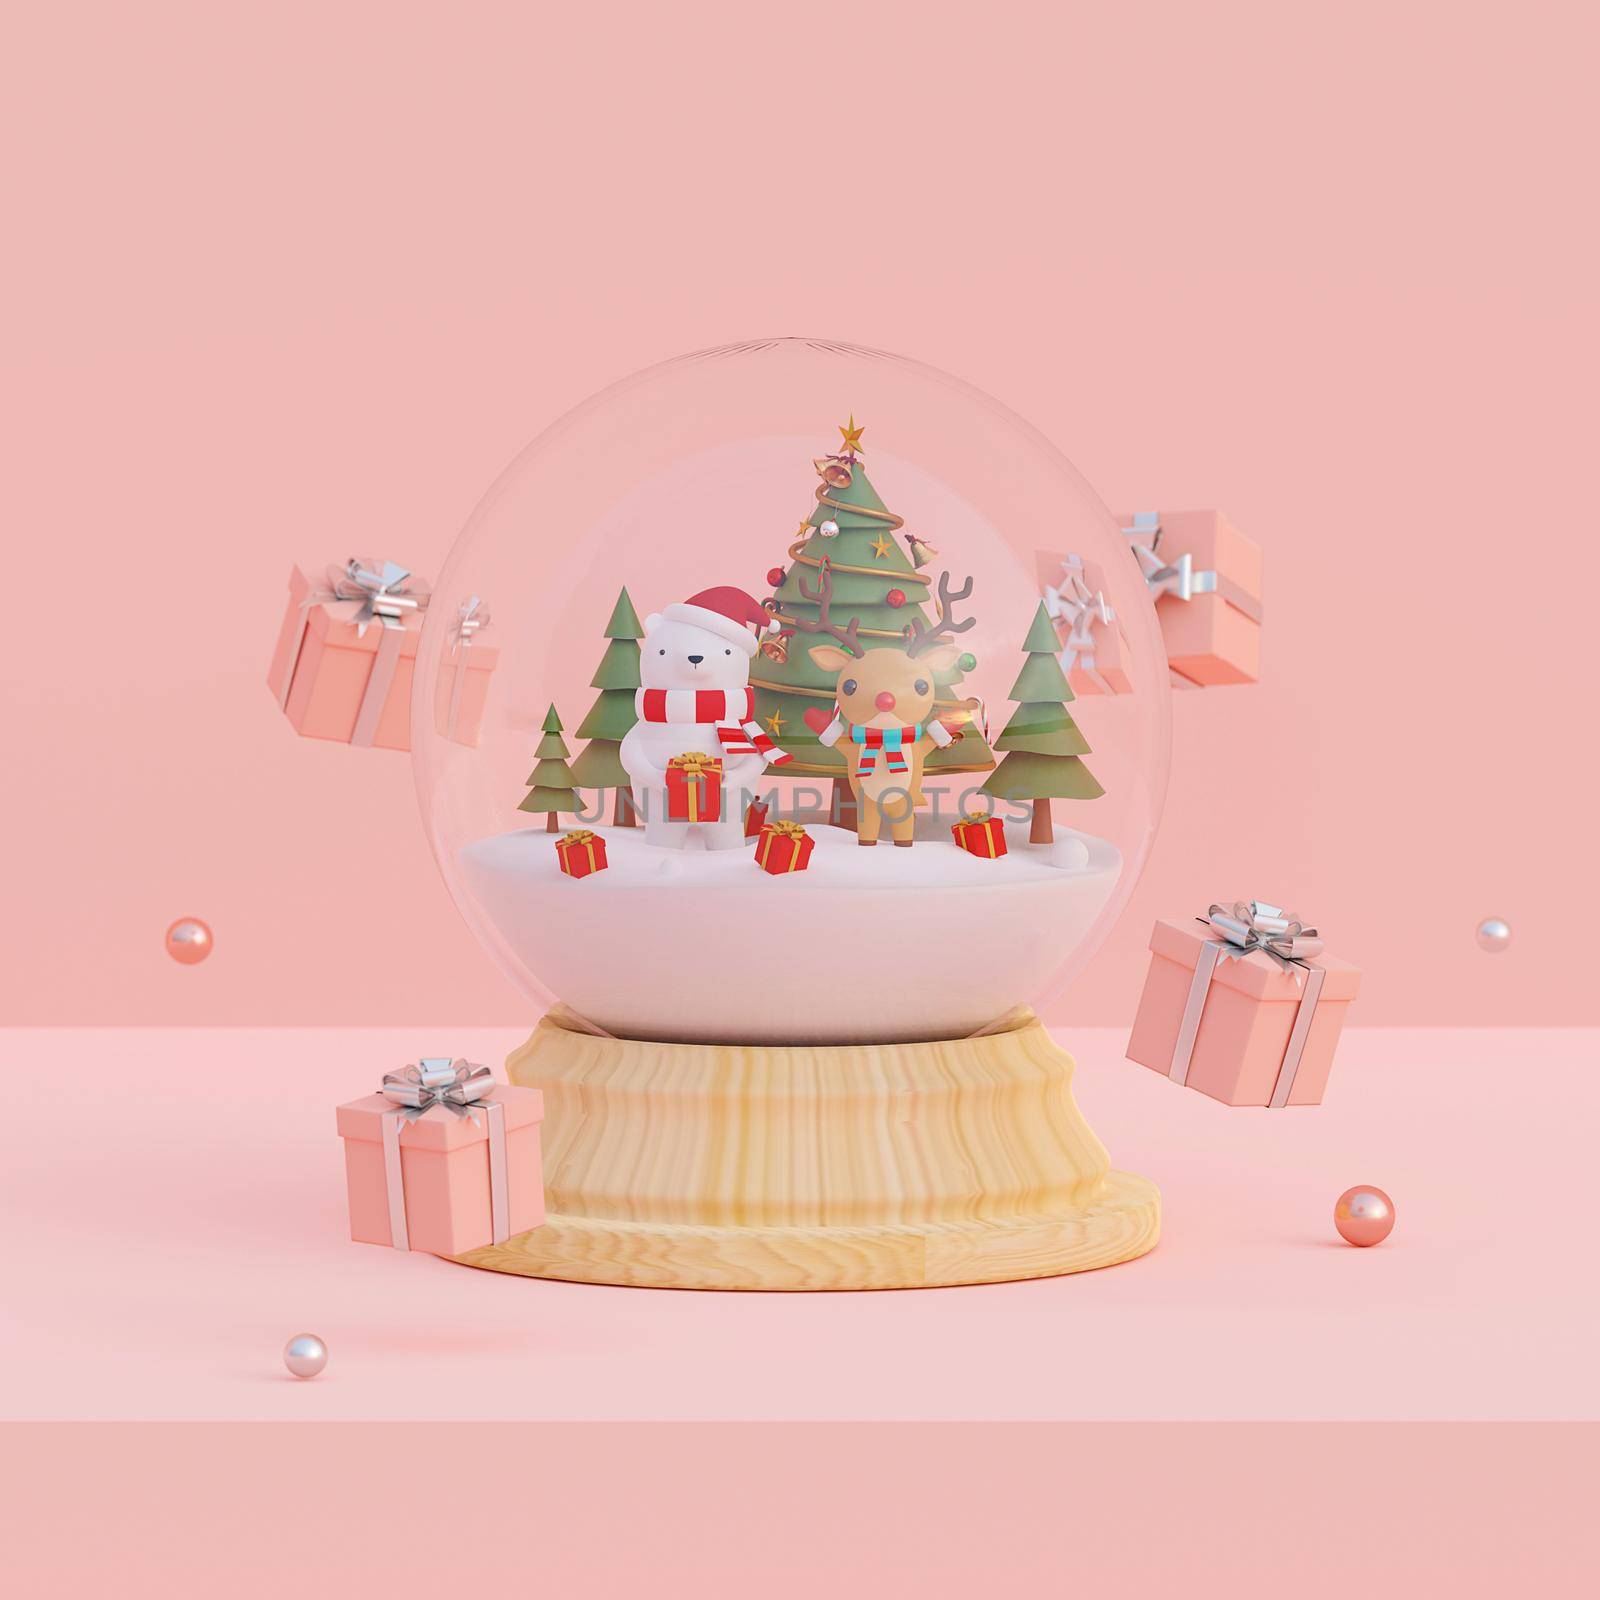 Merry Christmas and Happy New Year, Scene of Christmas gifts and bear, Reindeer with Christmas tree in a snow globe, 3d rendering